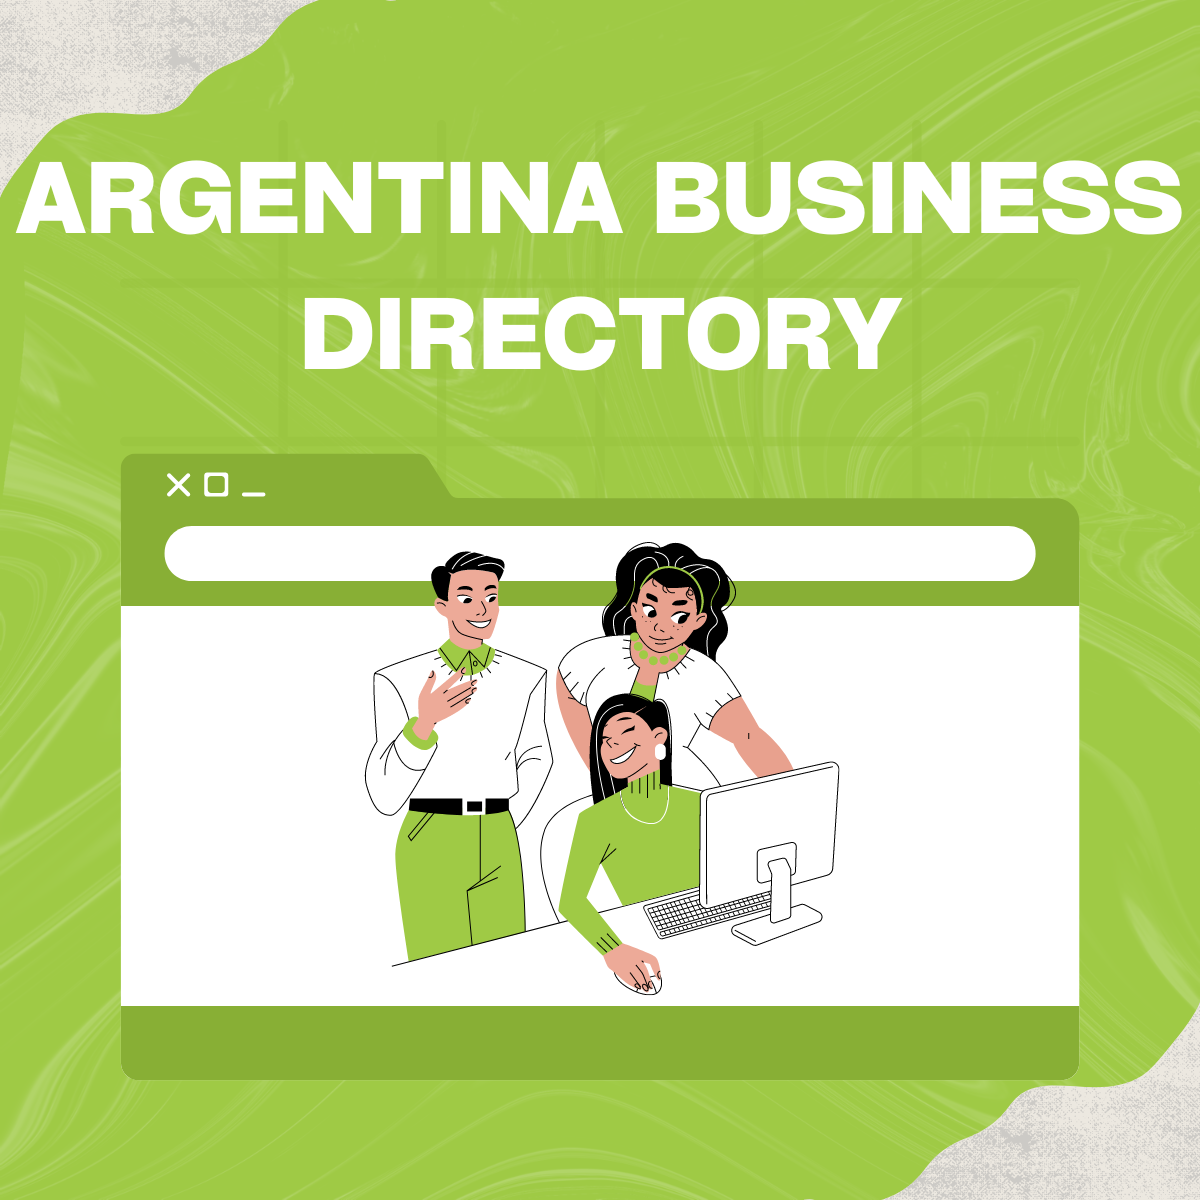 20 Active business directory & listing sites in Argentina